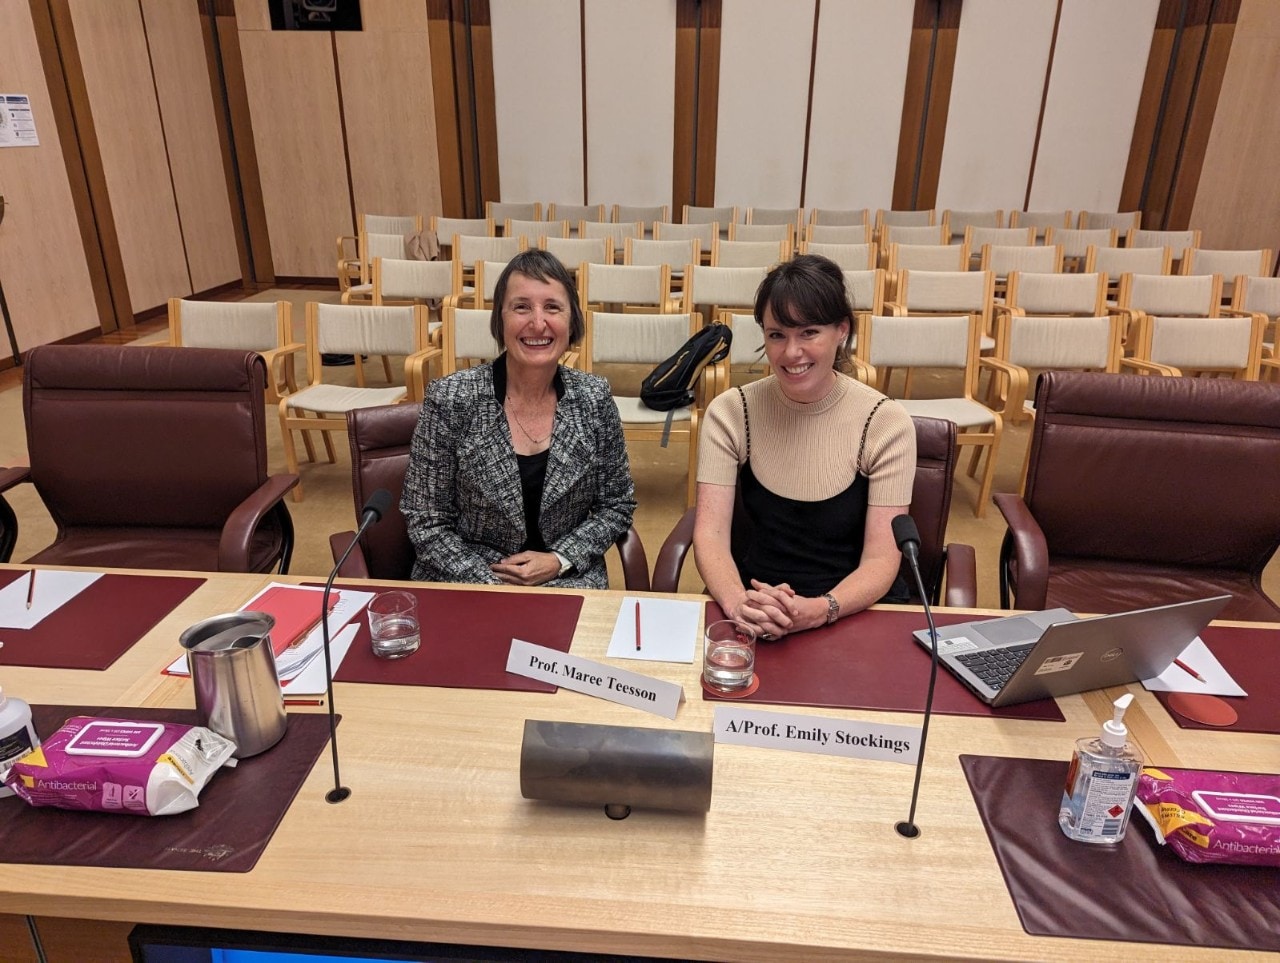 Maree Teesson (left) and Emily Stockings (right) giving evidence at the Senate inquiry into vaping. Both are looking at the camera and smiling. 